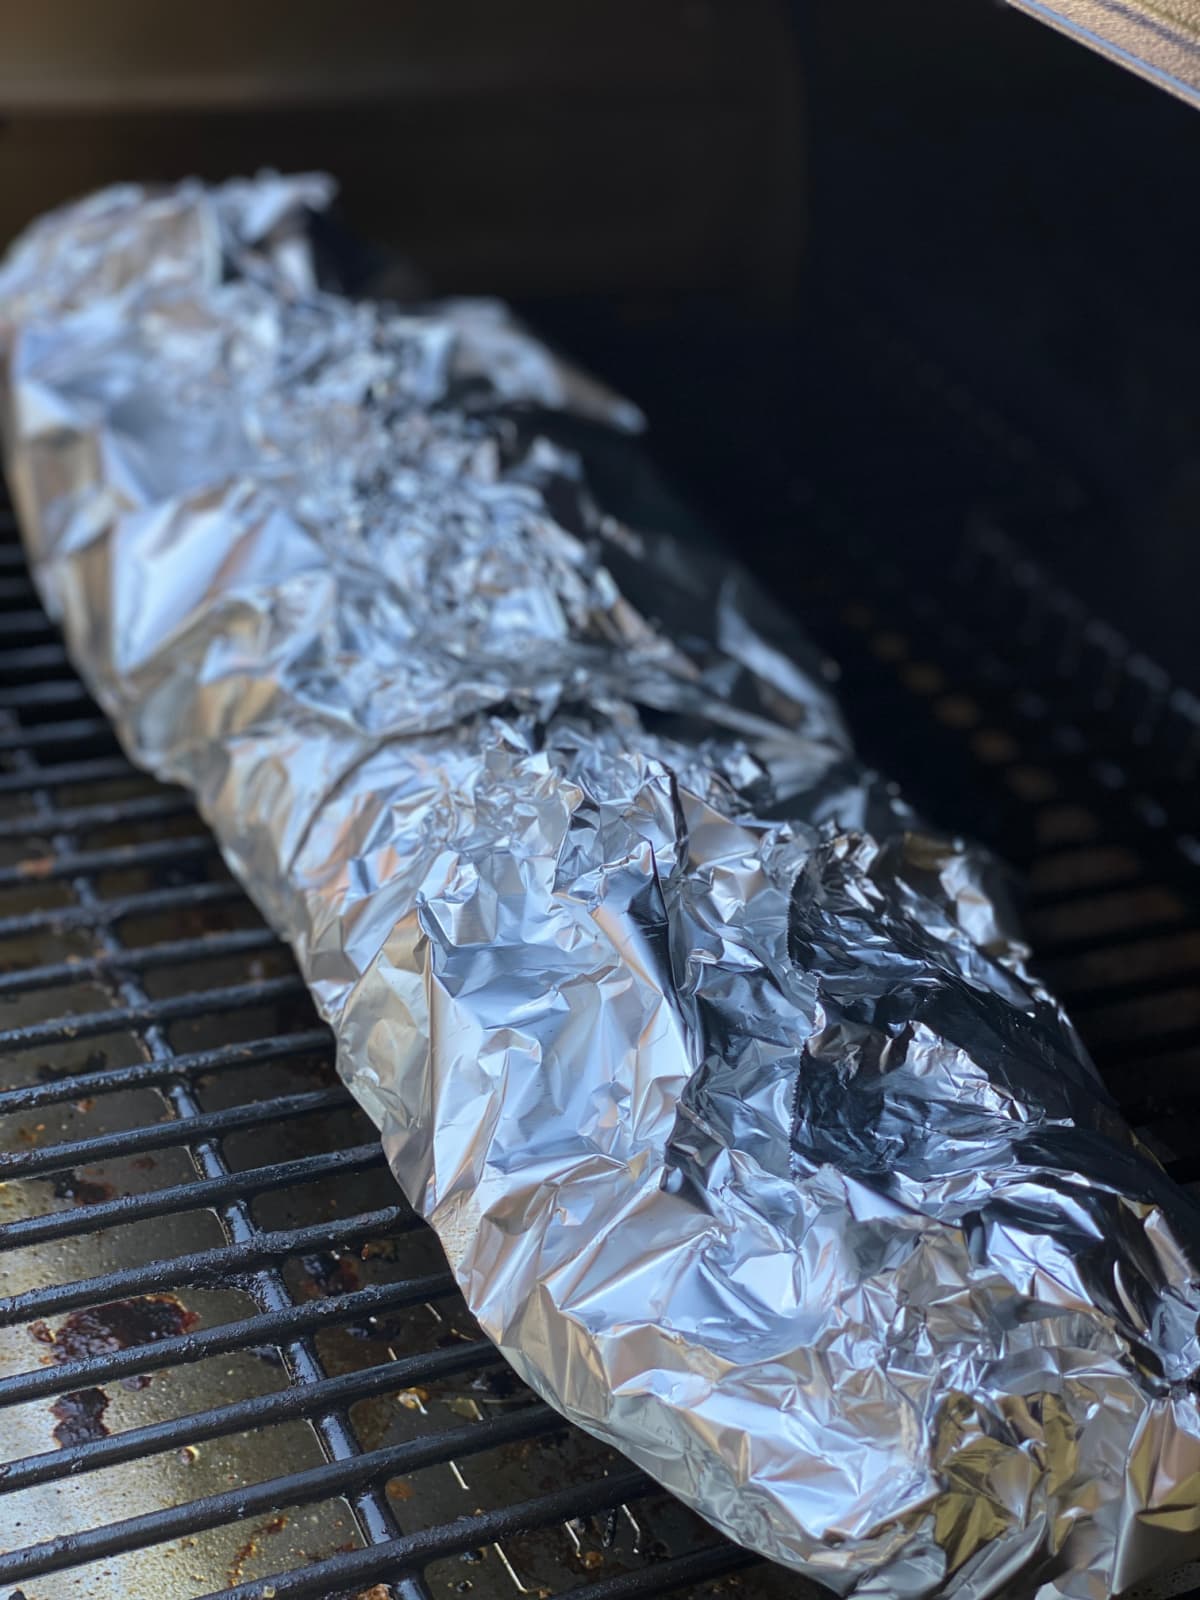 Smoked Ribs Covered in Foil